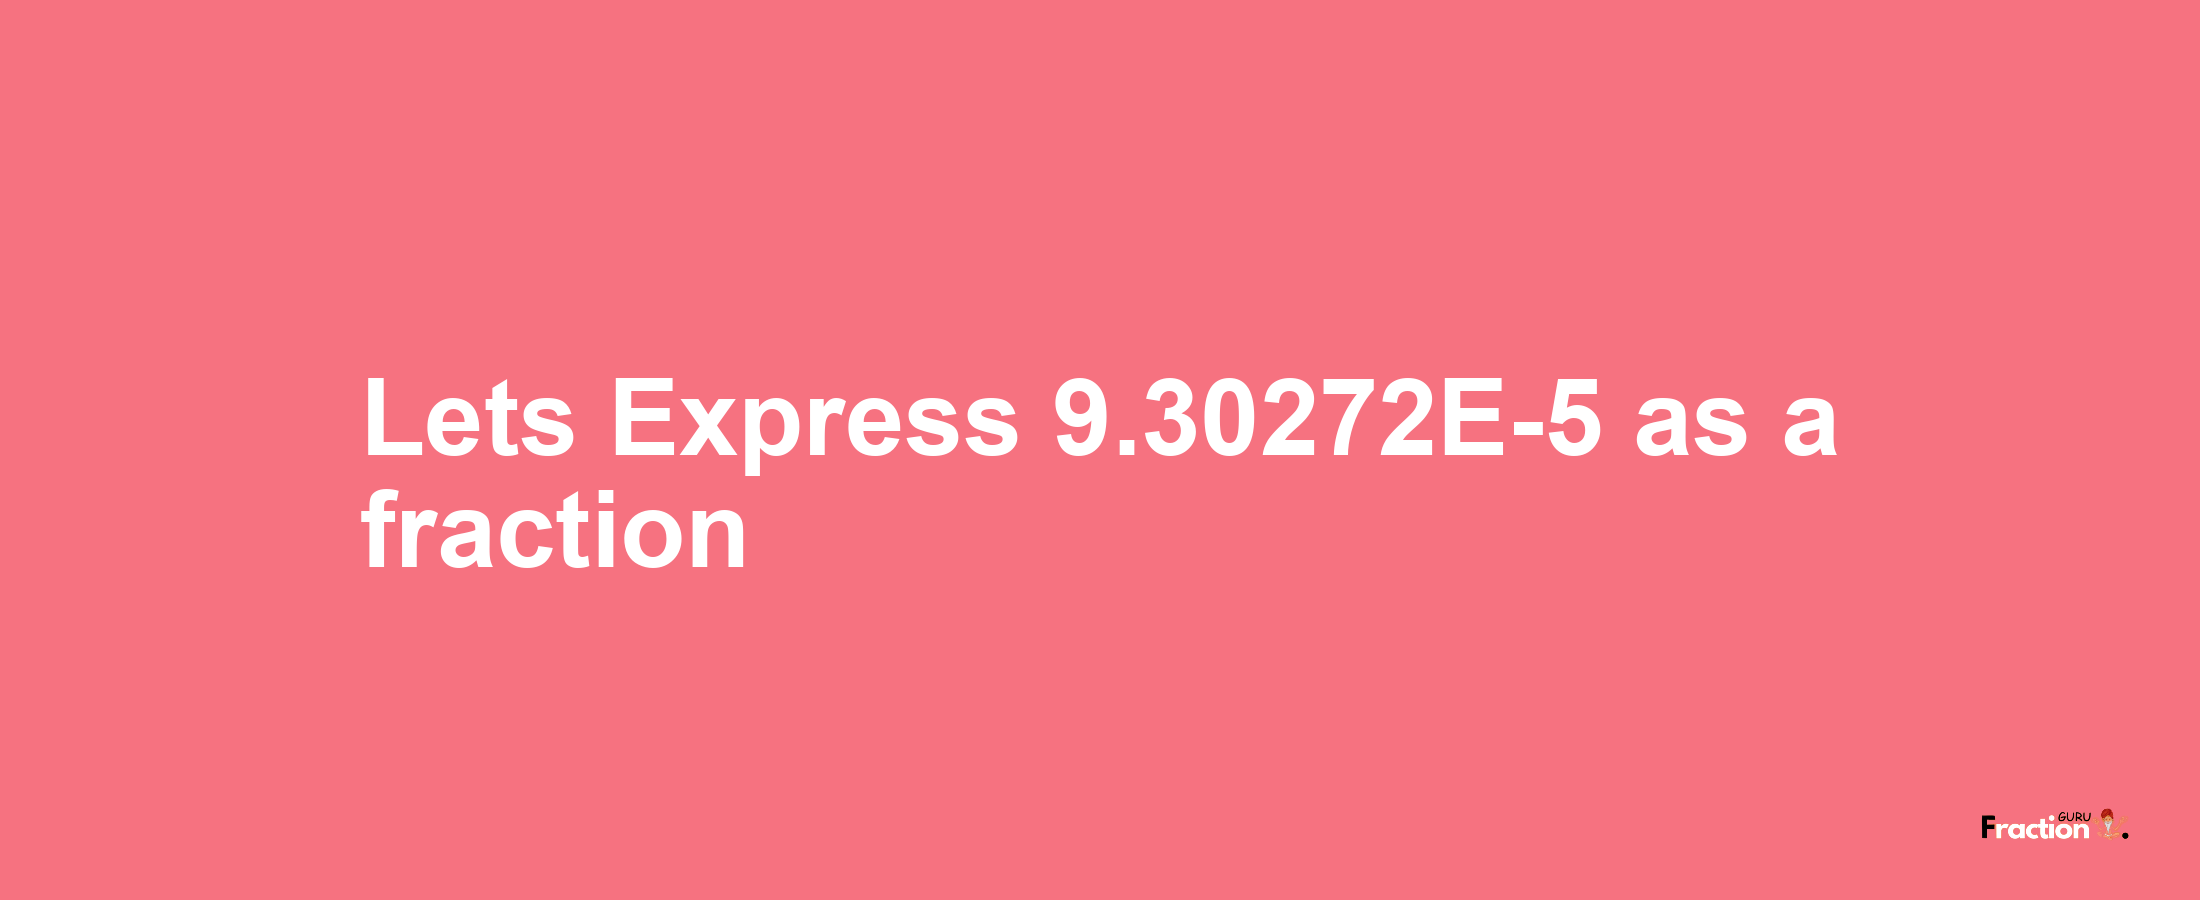 Lets Express 9.30272E-5 as afraction